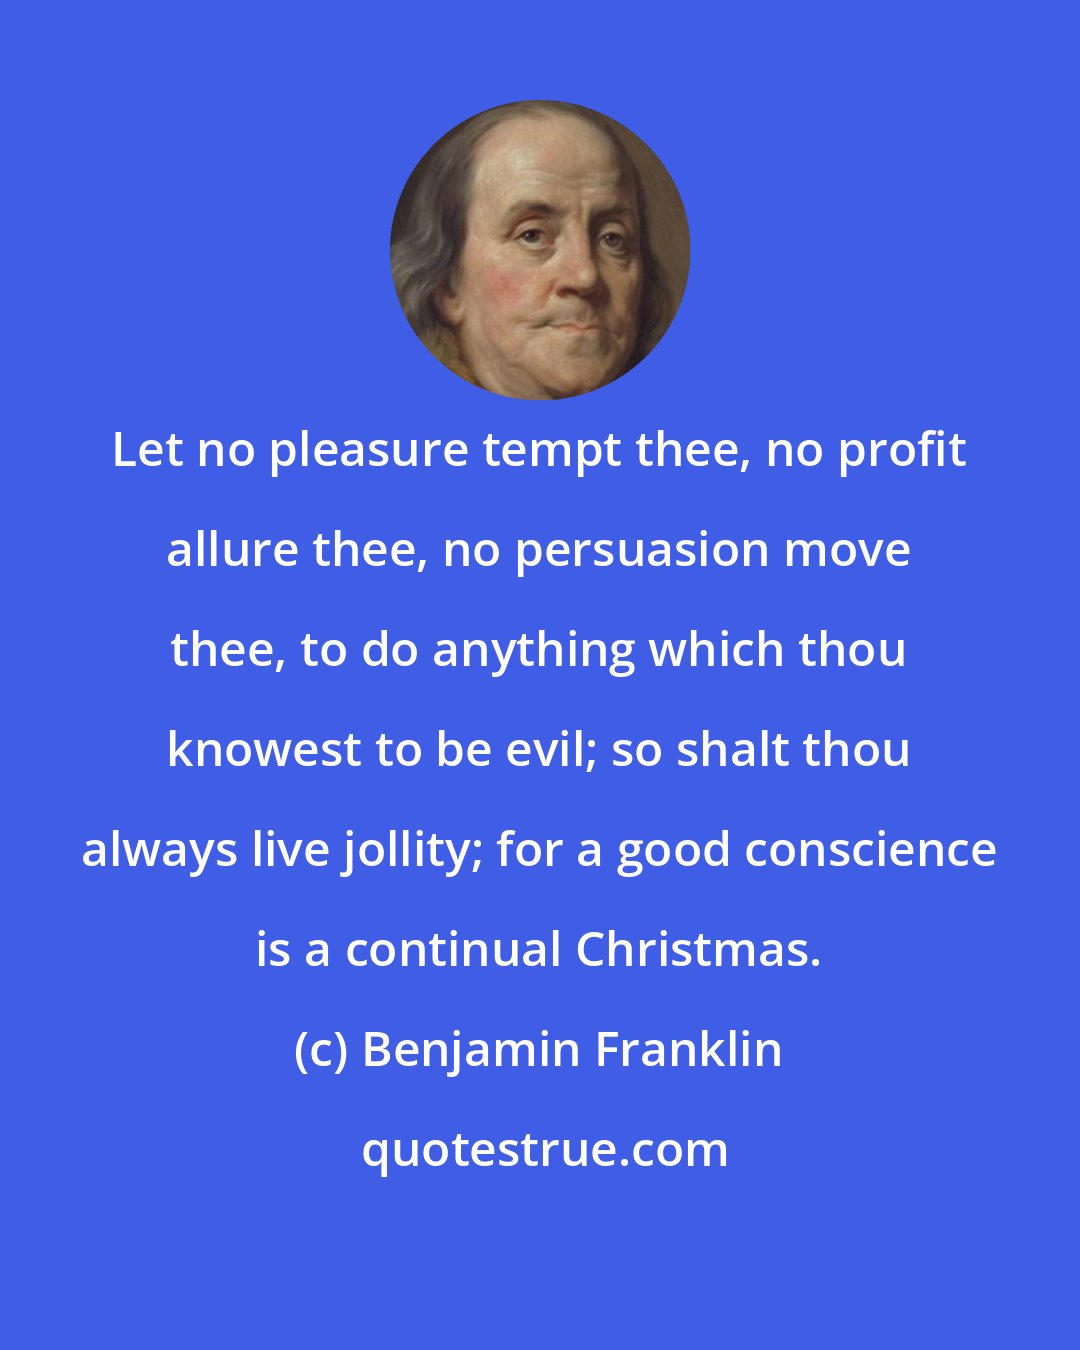 Benjamin Franklin: Let no pleasure tempt thee, no profit allure thee, no persuasion move thee, to do anything which thou knowest to be evil; so shalt thou always live jollity; for a good conscience is a continual Christmas.